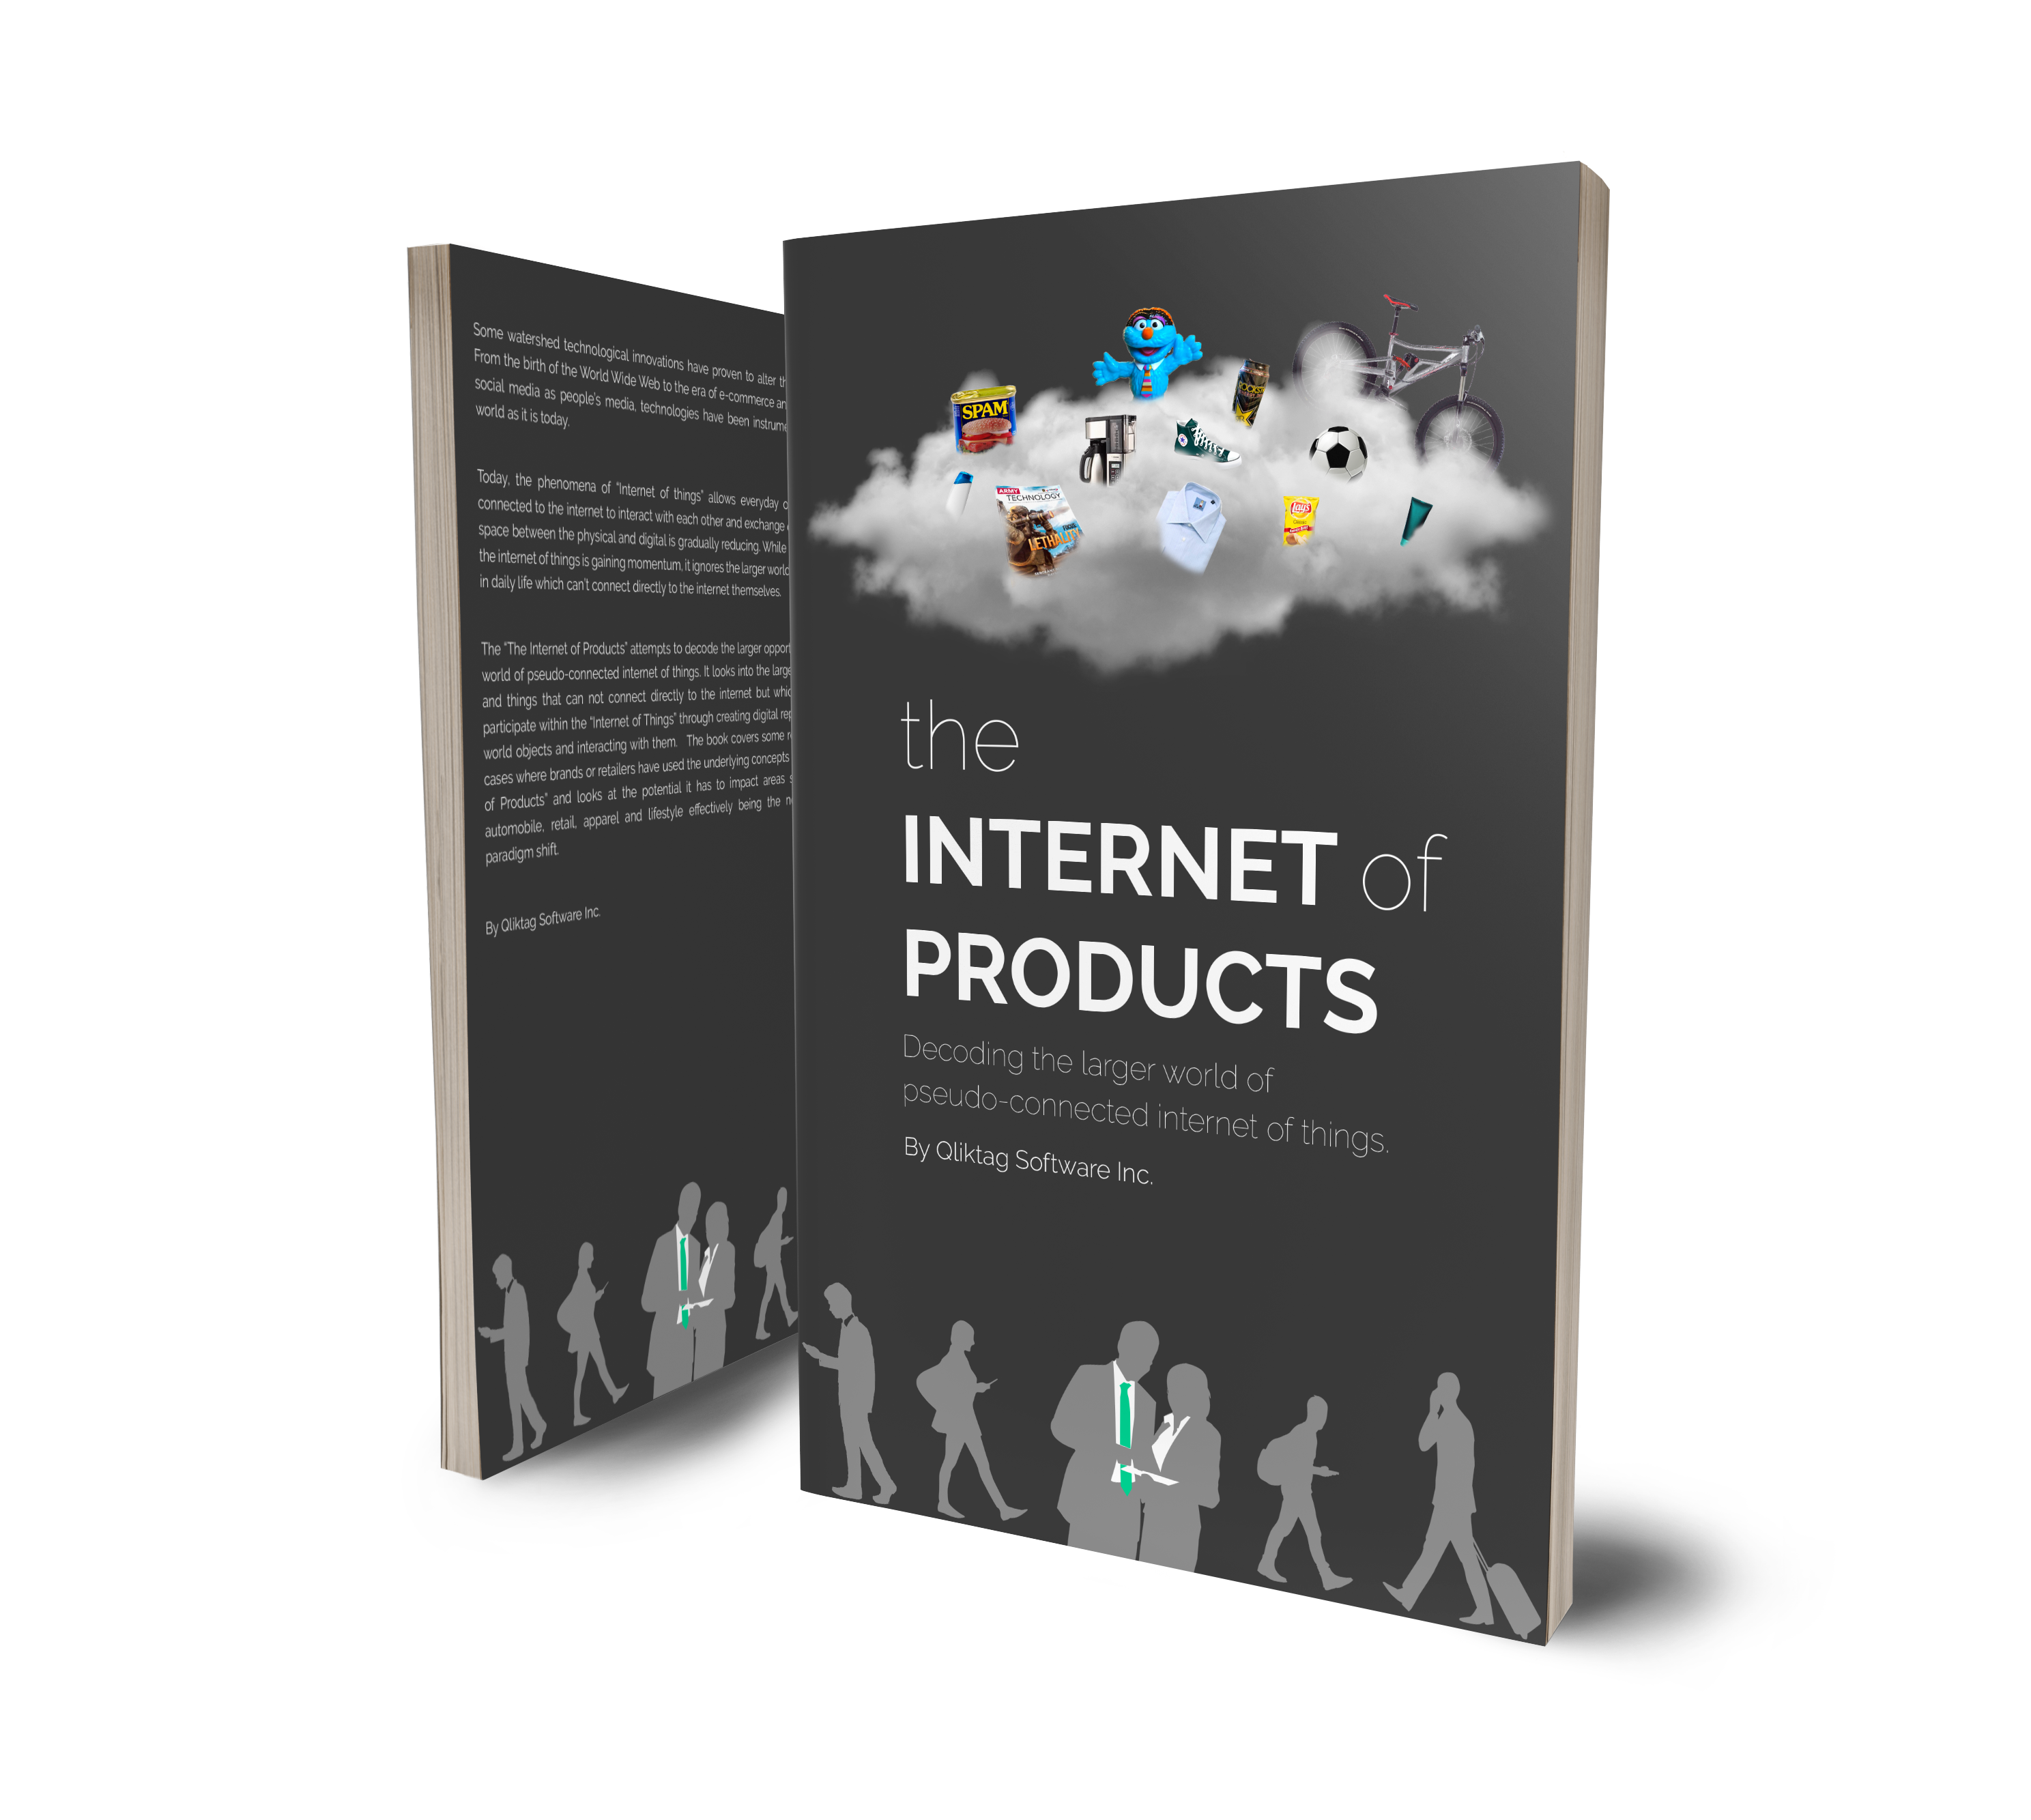 The Internet of Products - Book by Qliktag Software - IOT - Internet of Things